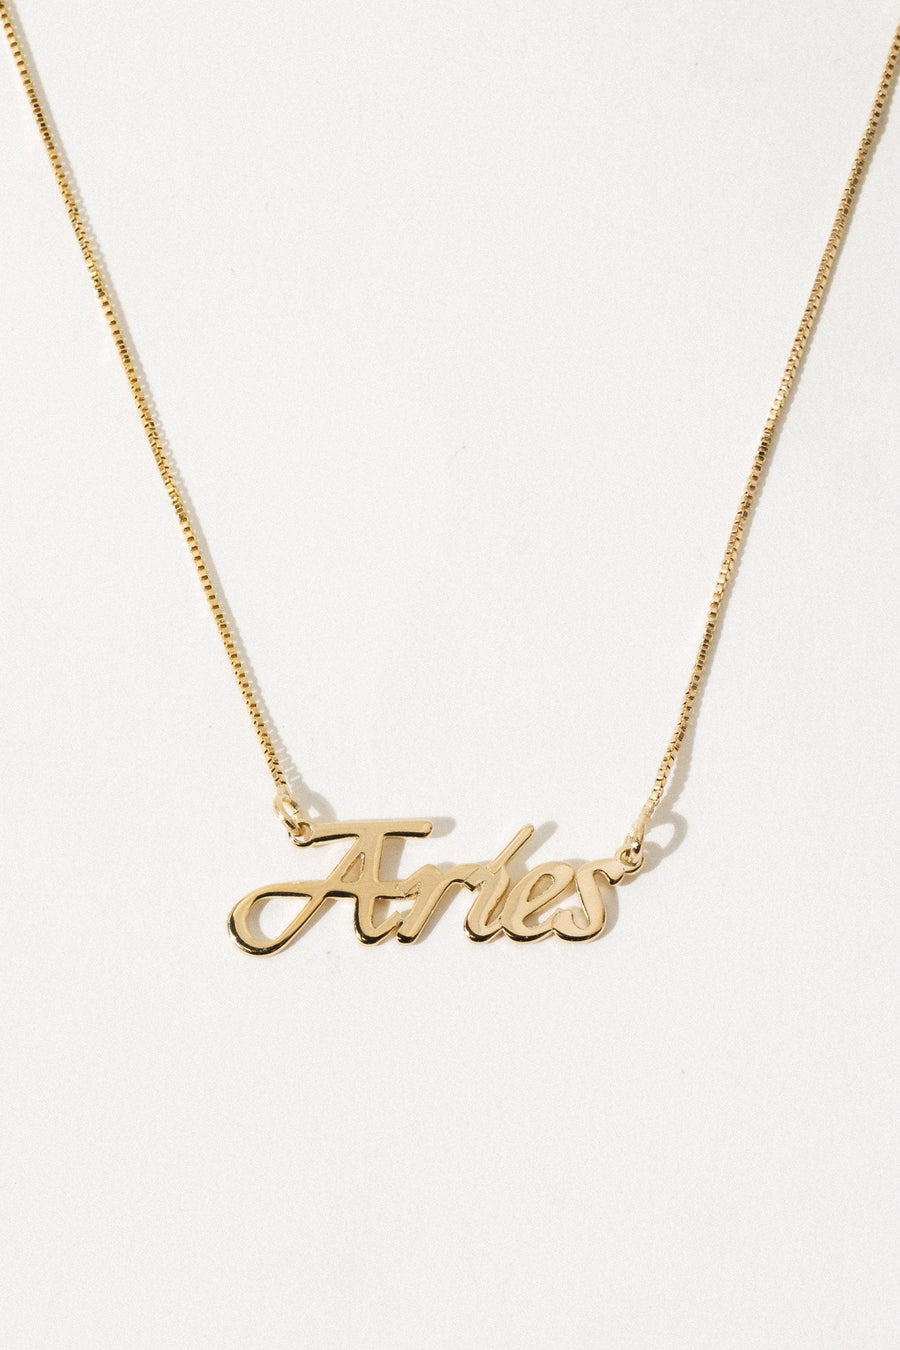 The Goth Booth Jewelry Aries / Gold / 16 inches Signature Zodiac Necklace